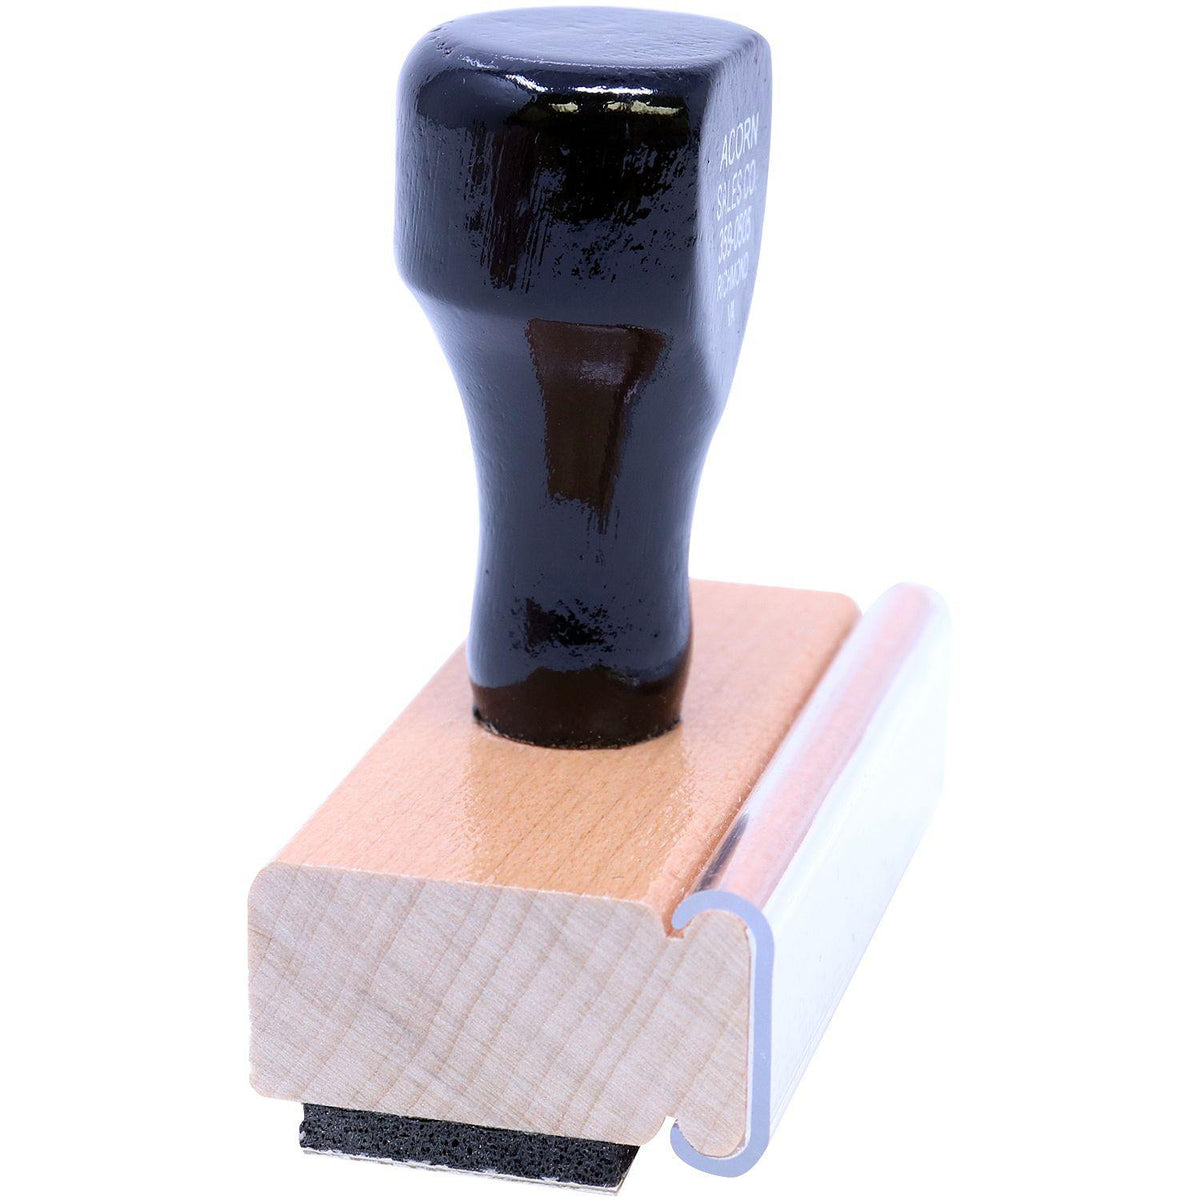 Side View of Large Government Exhibit Rubber Stamp at an Angle